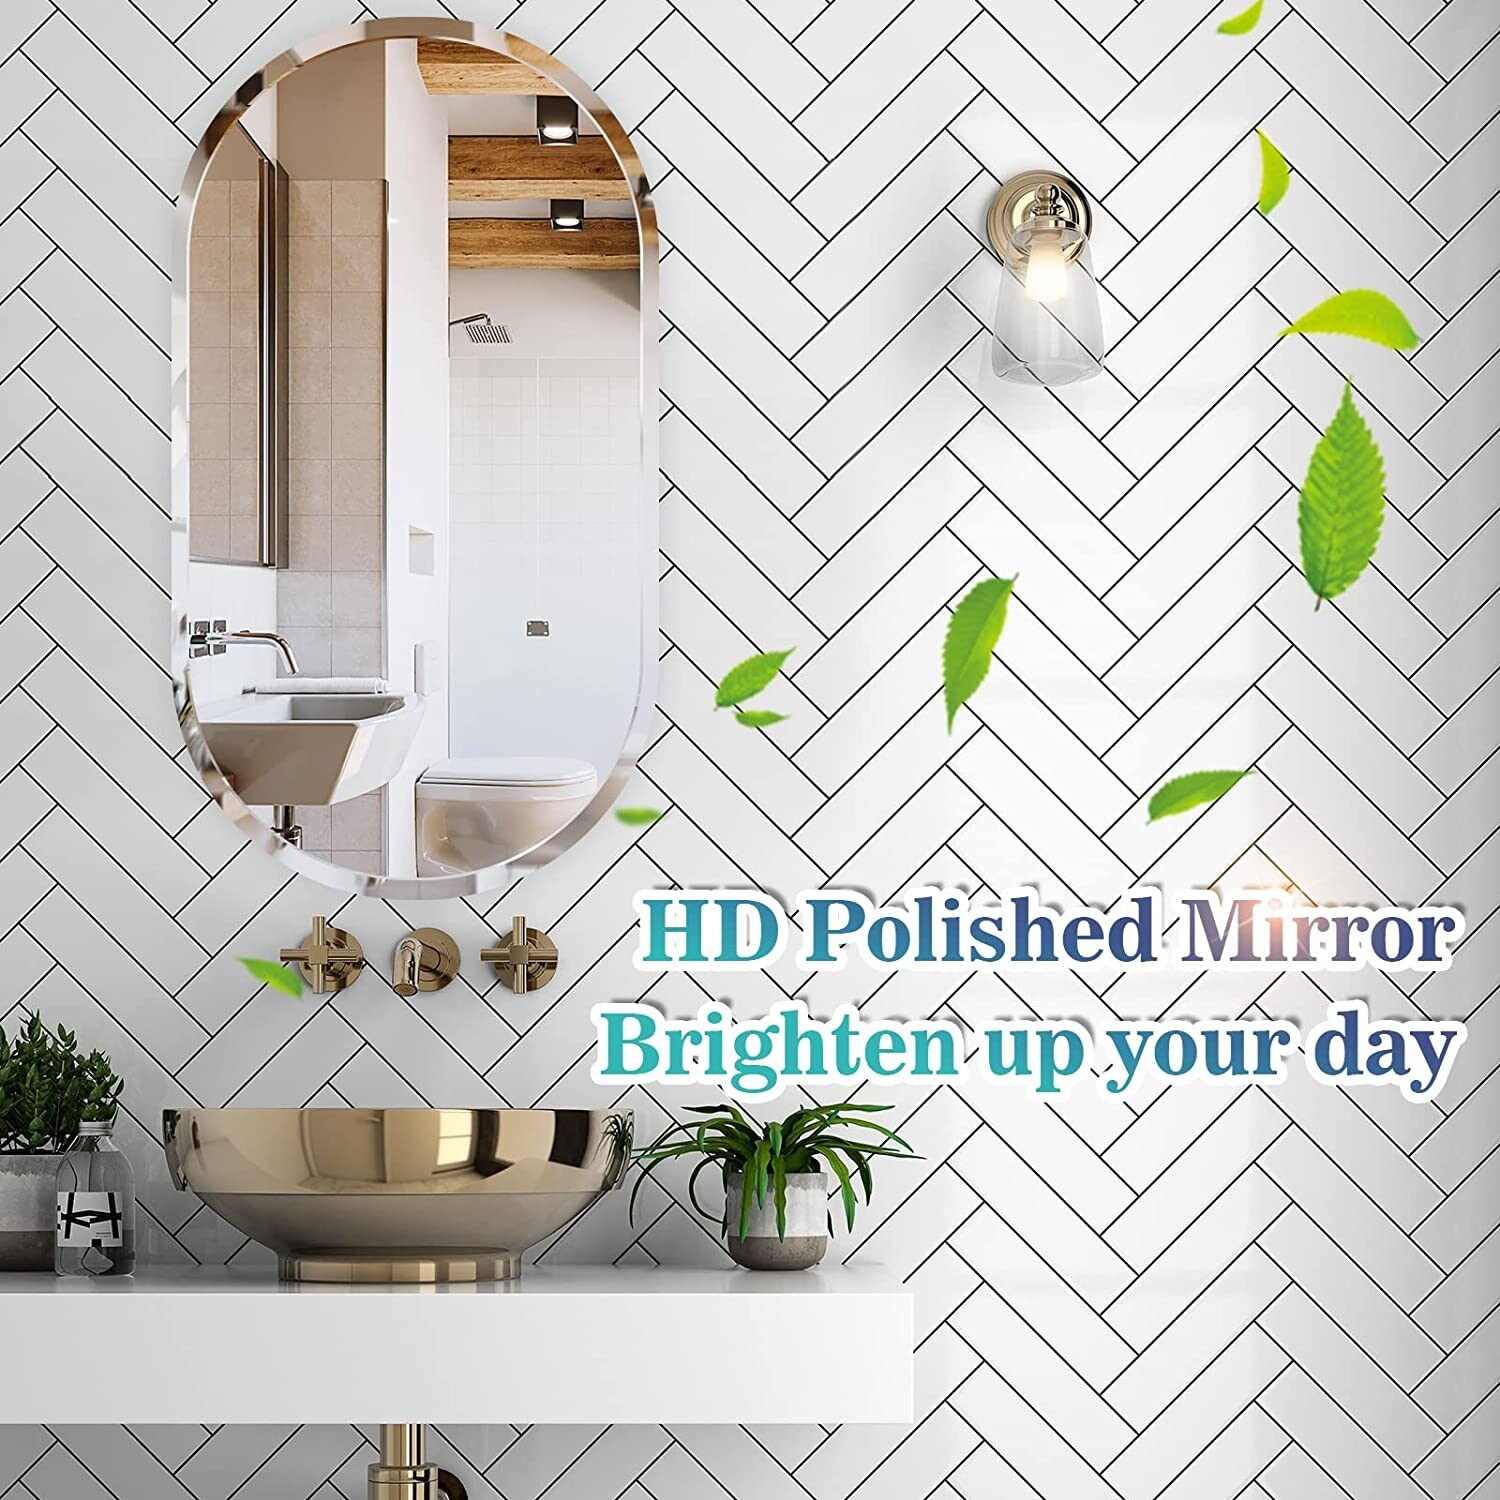 Arched Frameless Mirror 24 x 36 Inch - Beveled Polished Edge - Arch Hanging Wall Mounted Mirror for Bathroom